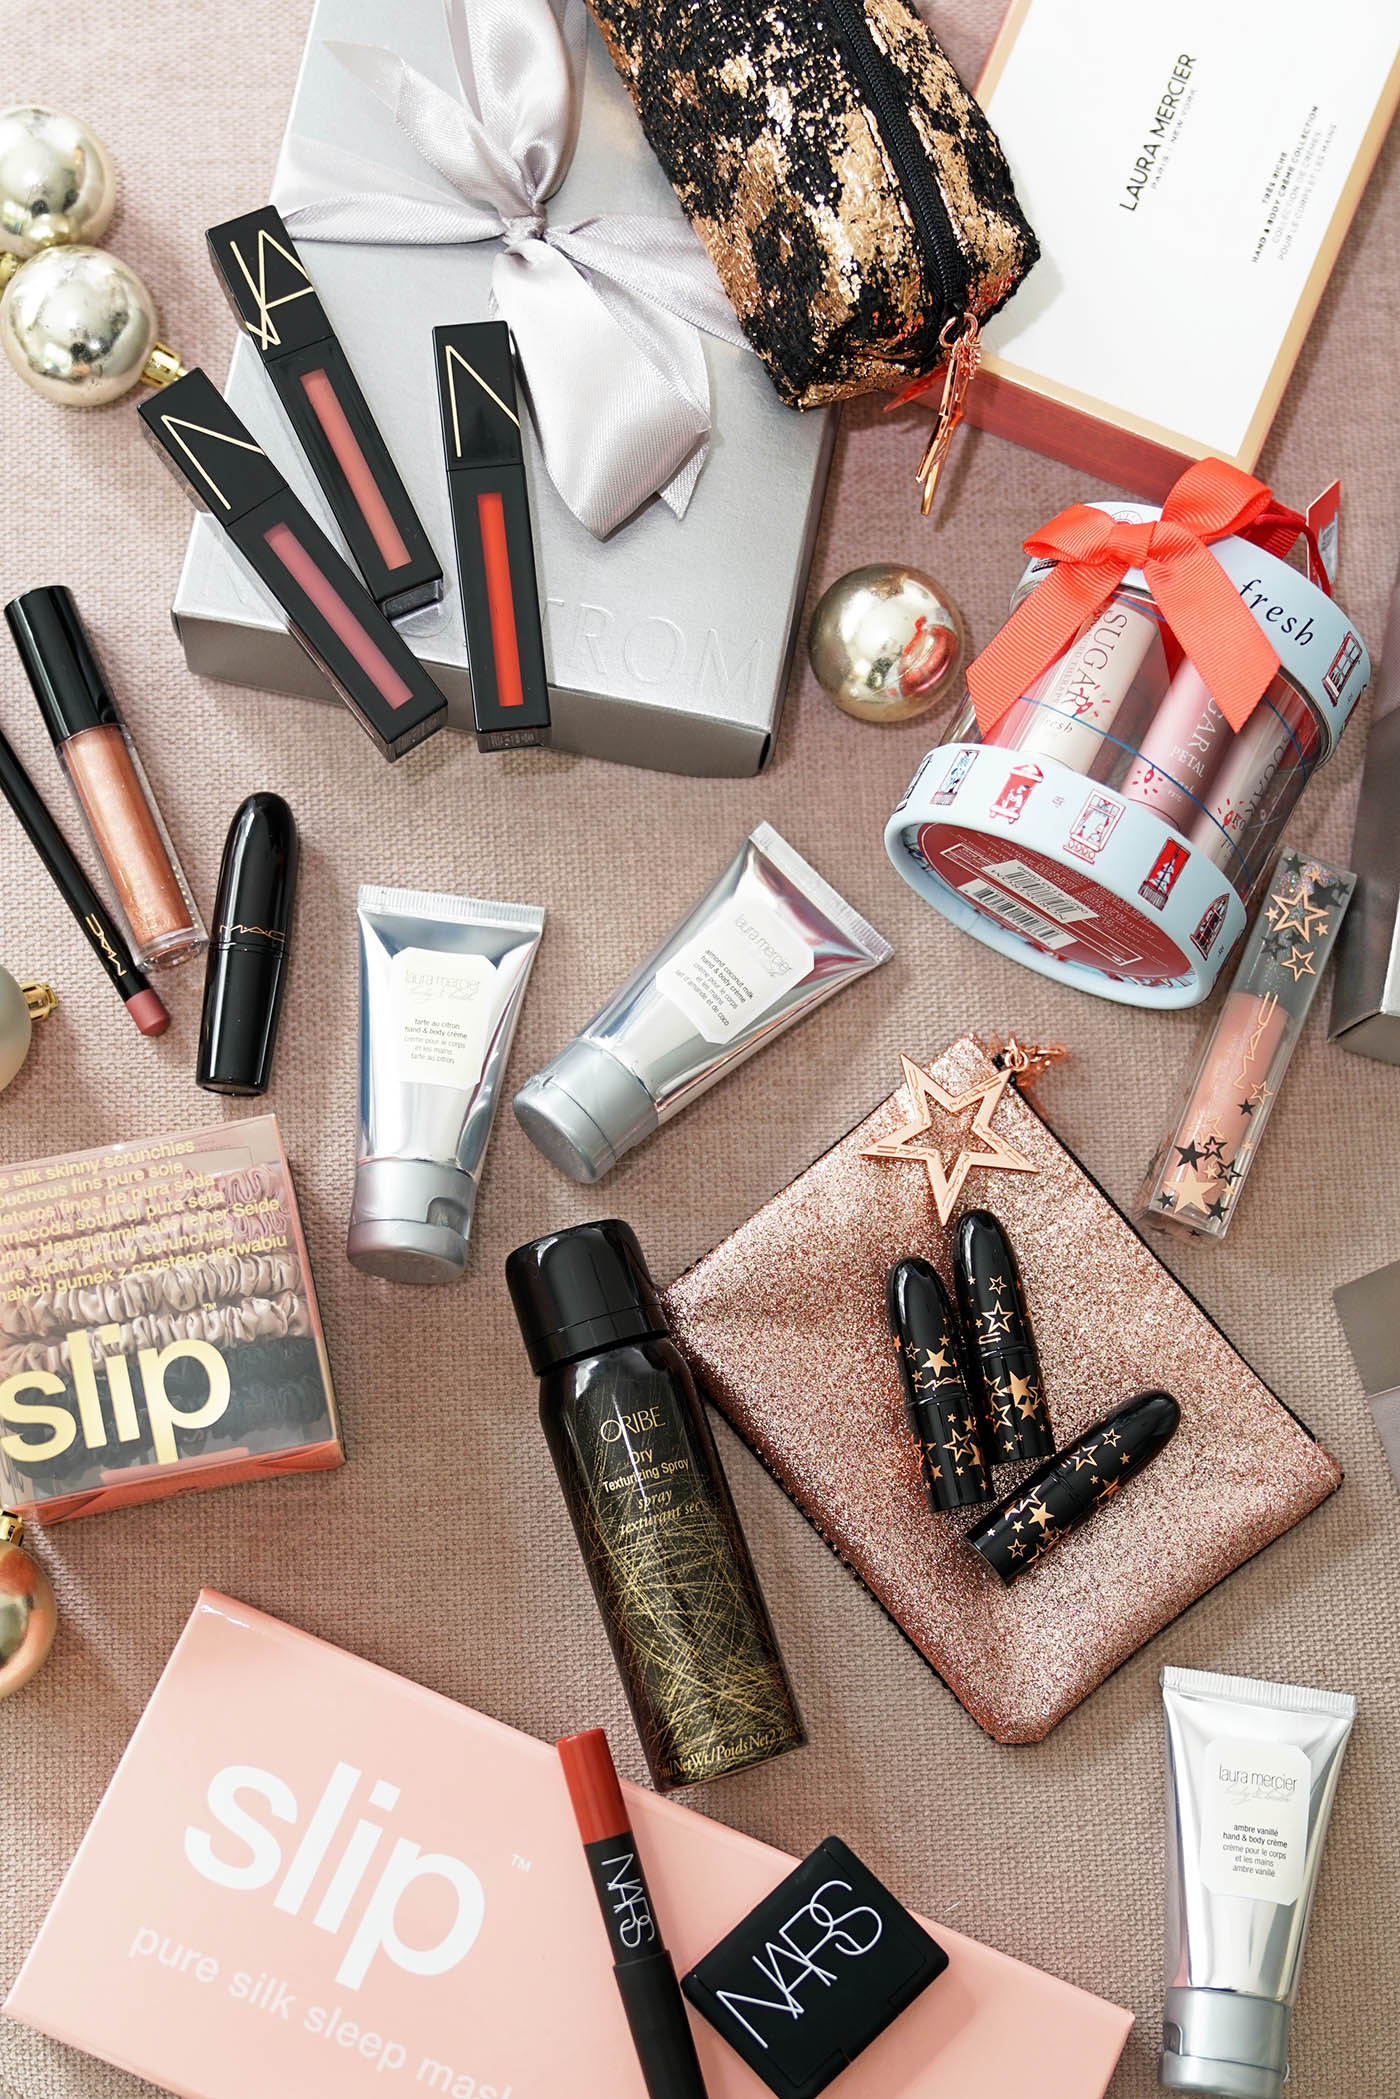 Best Holiday Beauty Gift Ideas from Nordstrom $50 and Under